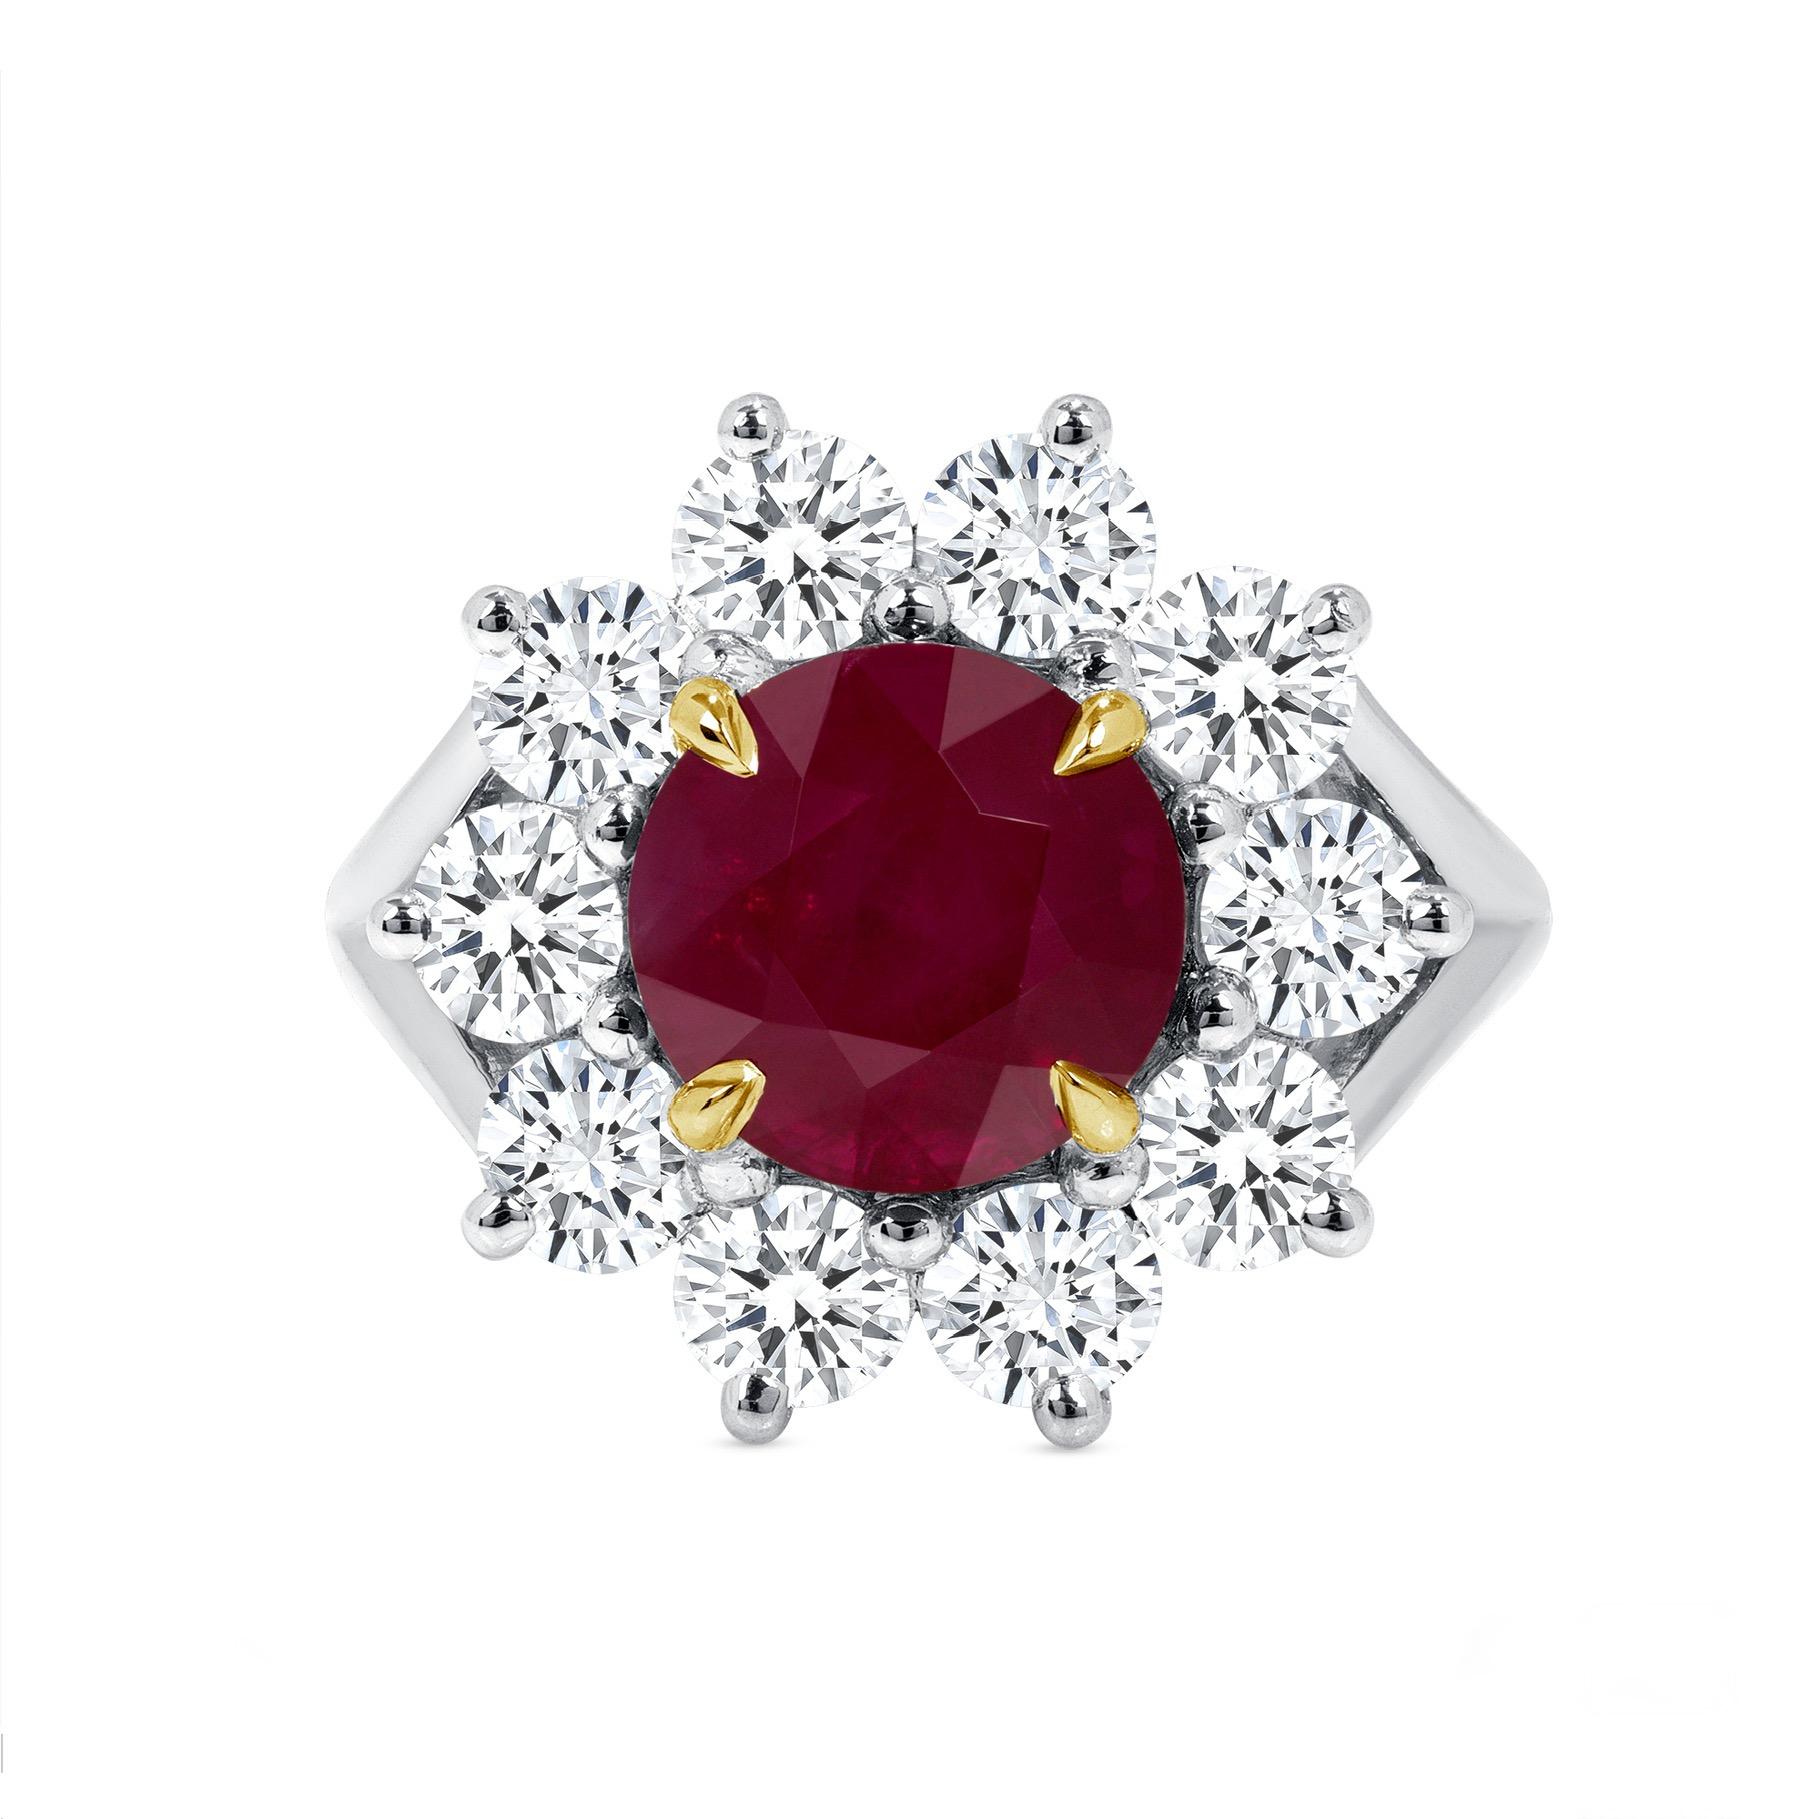 4.32ct GIA certified, round Burma Ruby ring.  For Sale